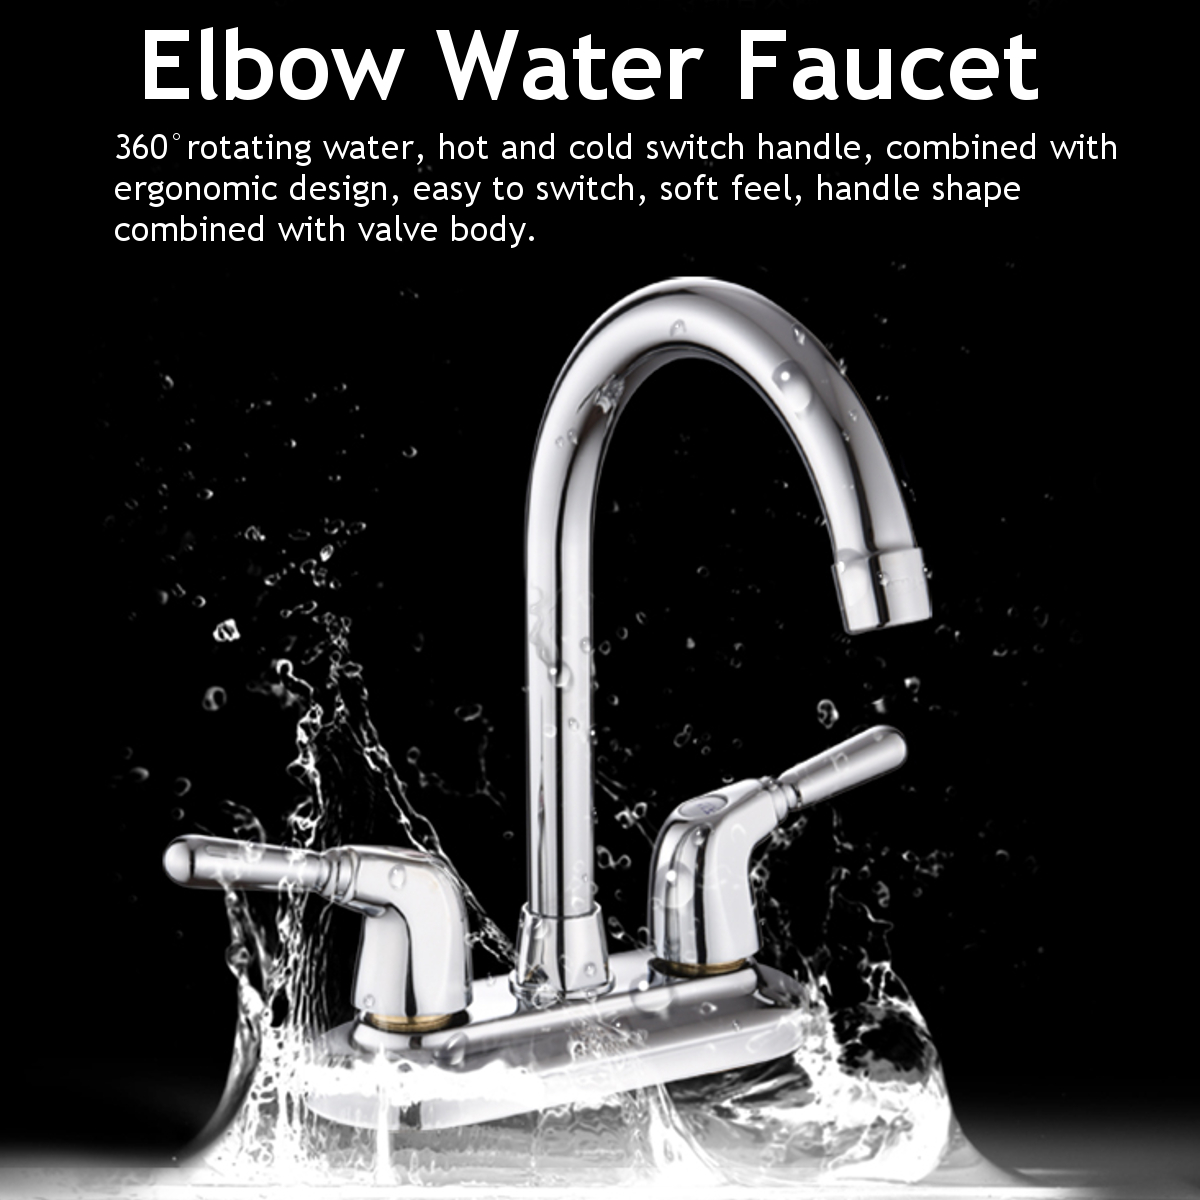 Novashion 360° Rotates Mixer Tap for Kitchen Faucet Double Holes and Handles Sink Faucet Basin Sink Mixer Water Tap - image 3 of 6